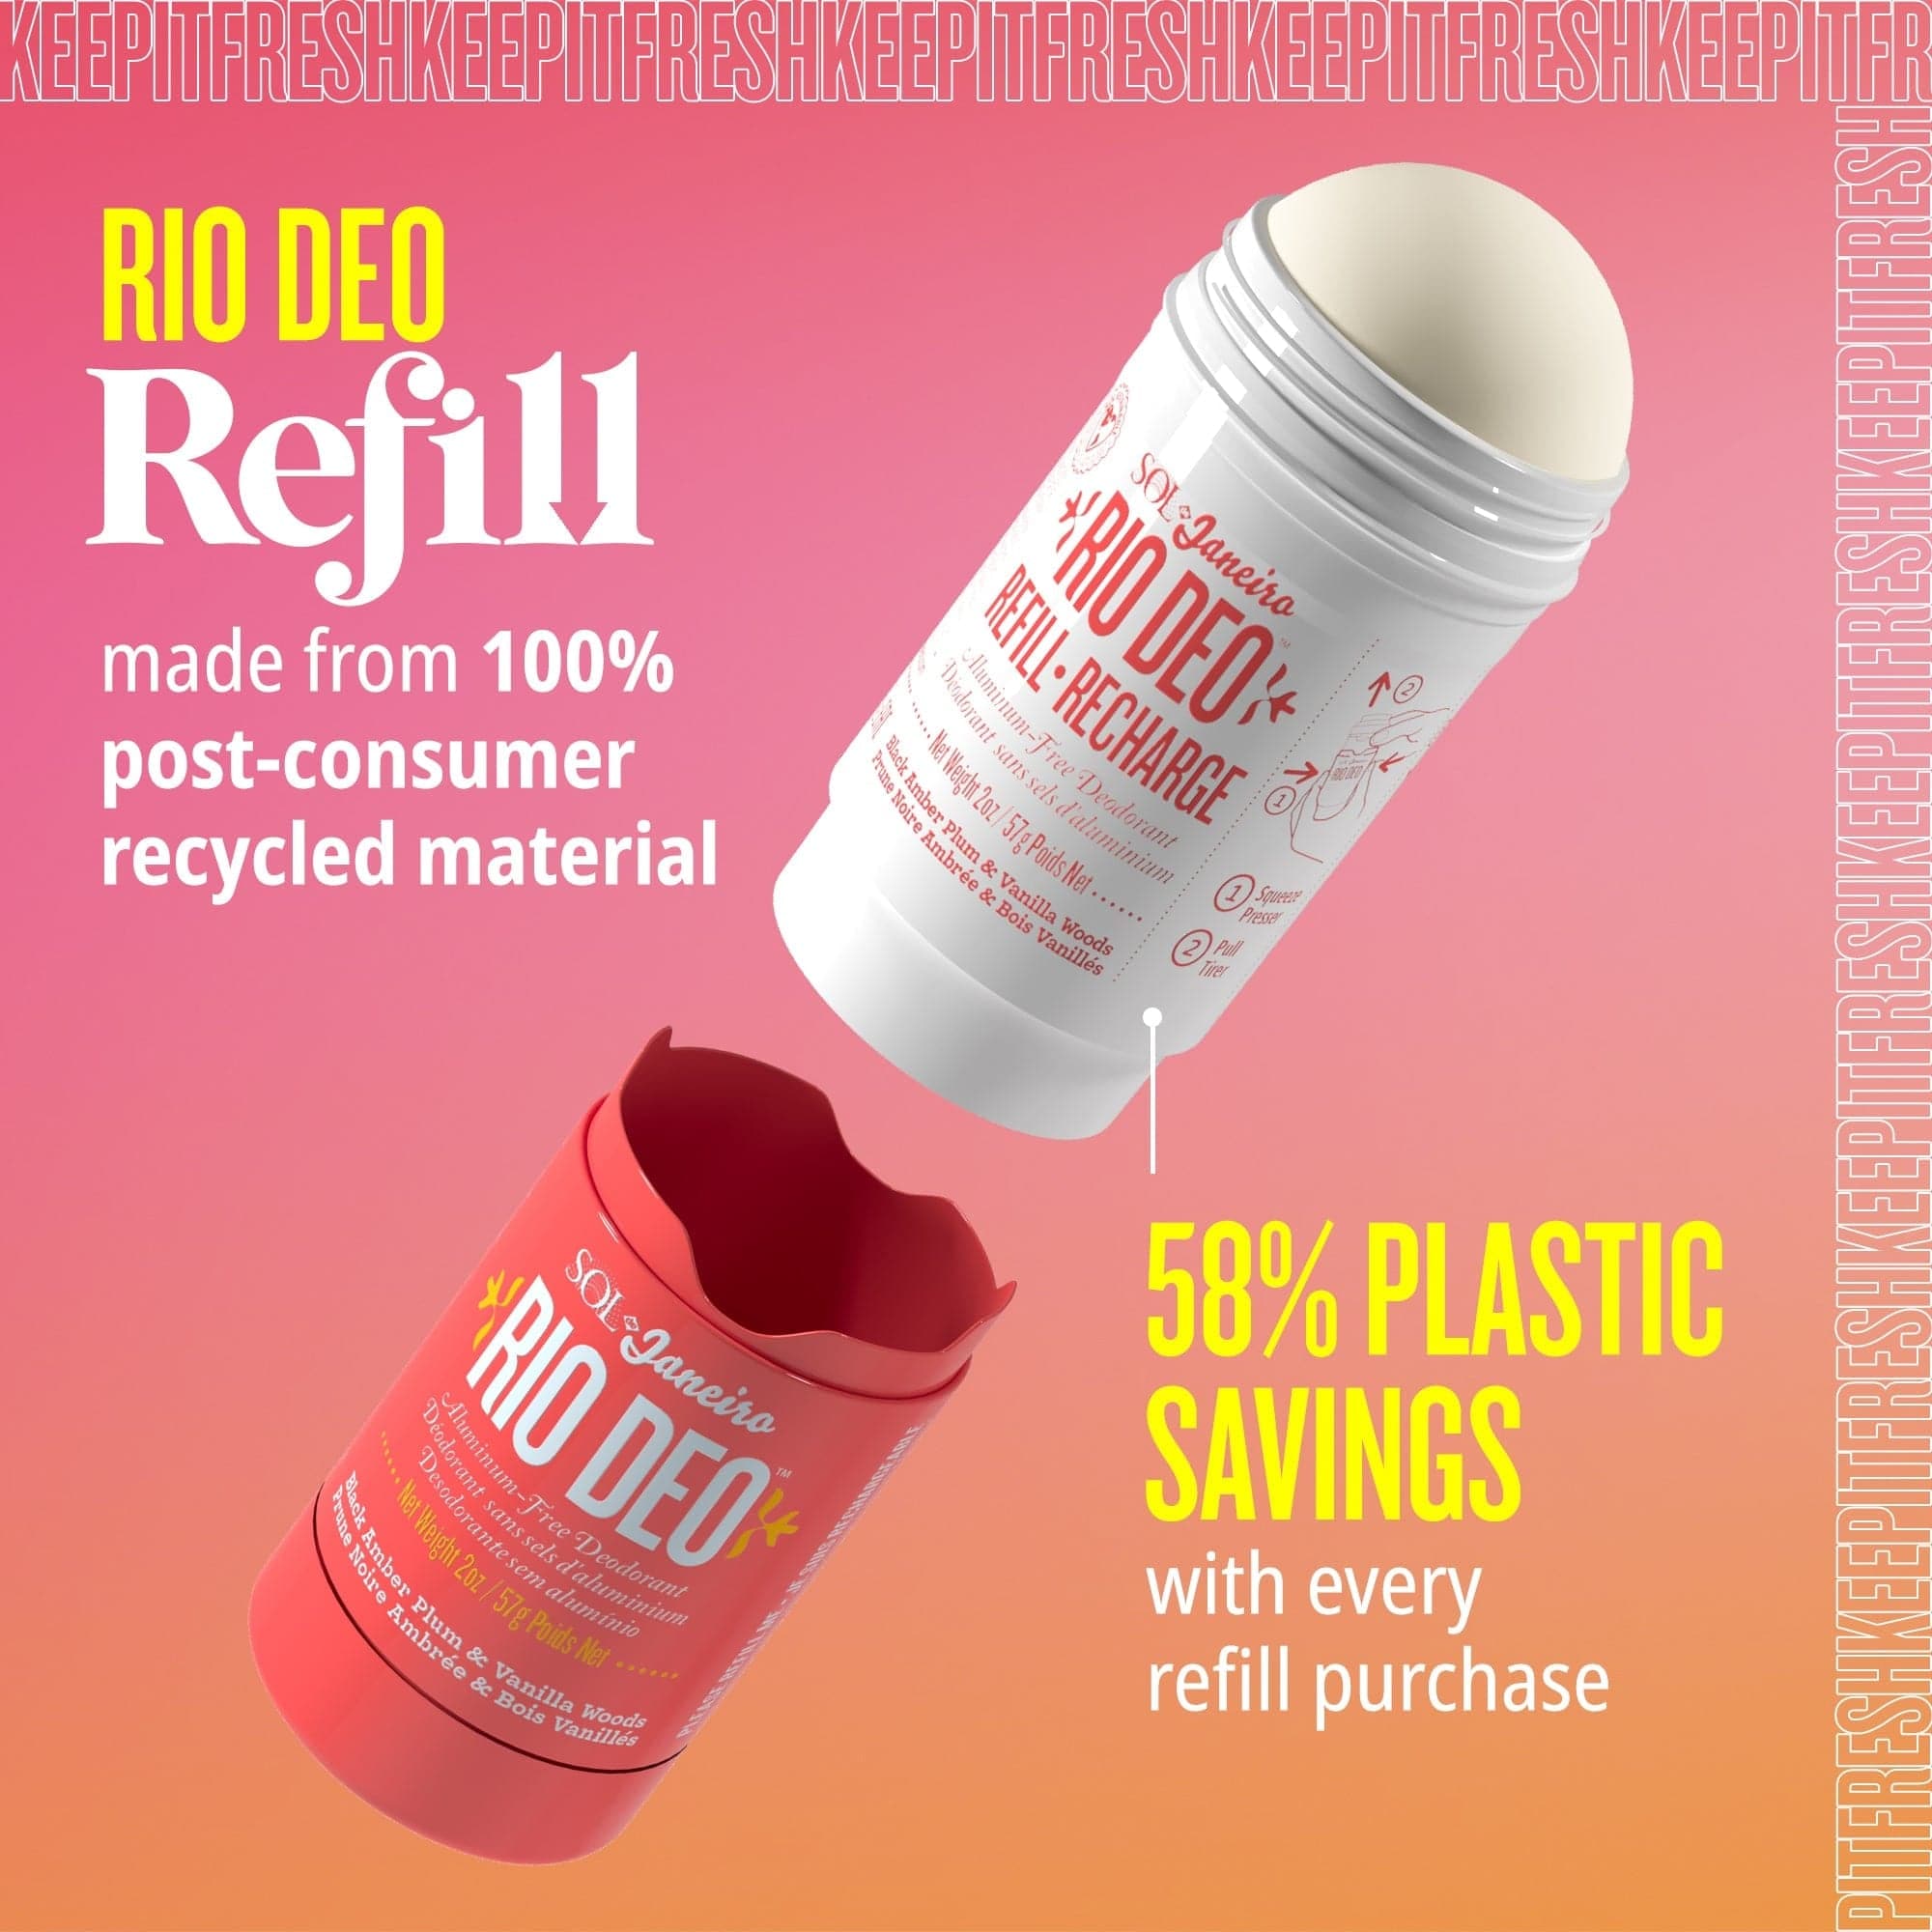 Rio deo refill made from 100% post-consumer recycled material. 58% plastic savings with every refill purchase